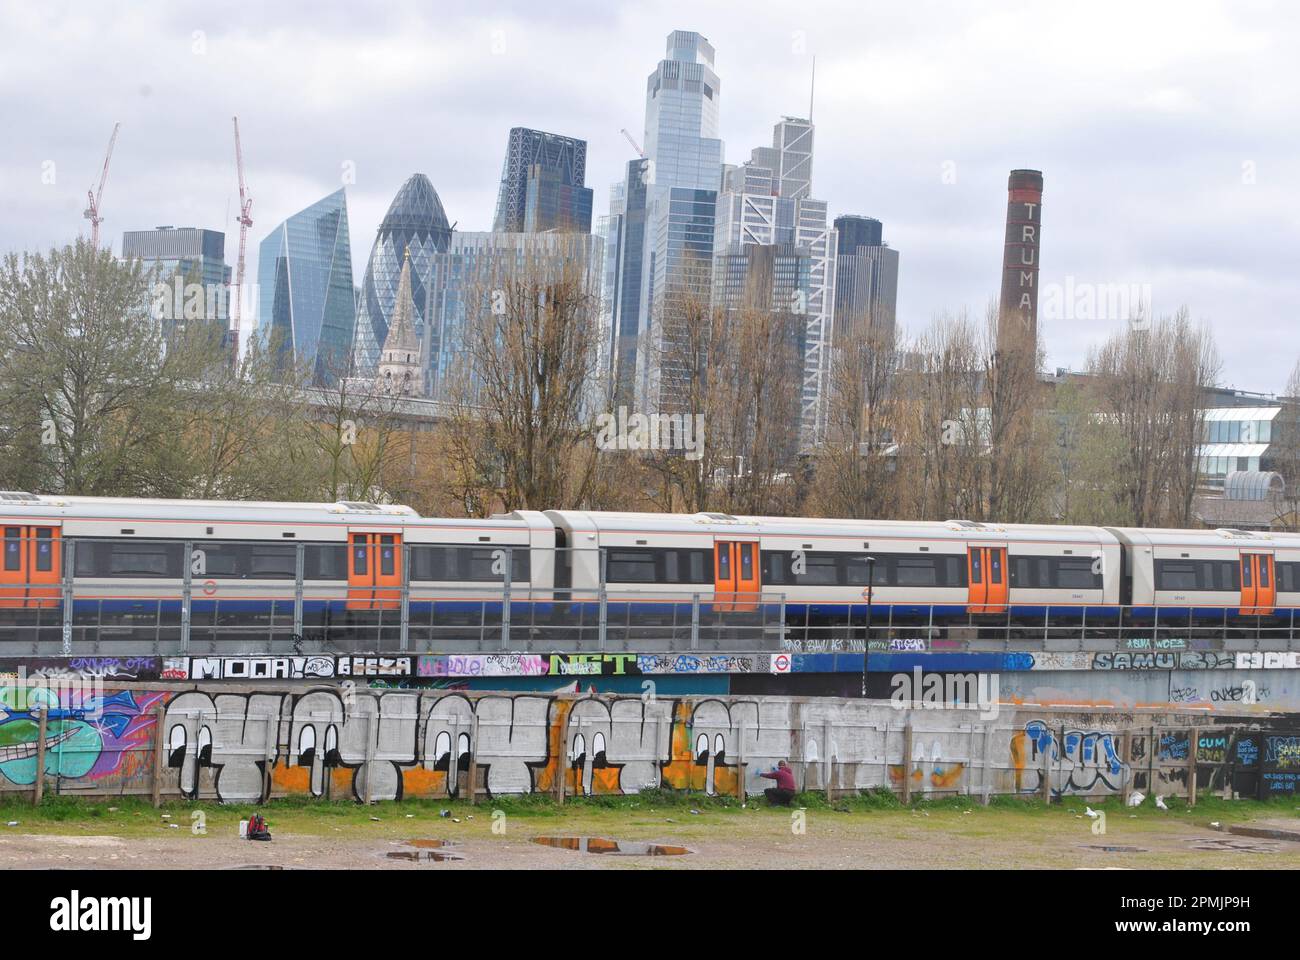 A GRAFFITI ARTIST PAINTS IN SHOREDITCH, EAST LONDON WITH A PASSING OVERGROUND TRAIN AND A VIEW OF THE CITY OF LONDON BEYOND HIM. Stock Photo